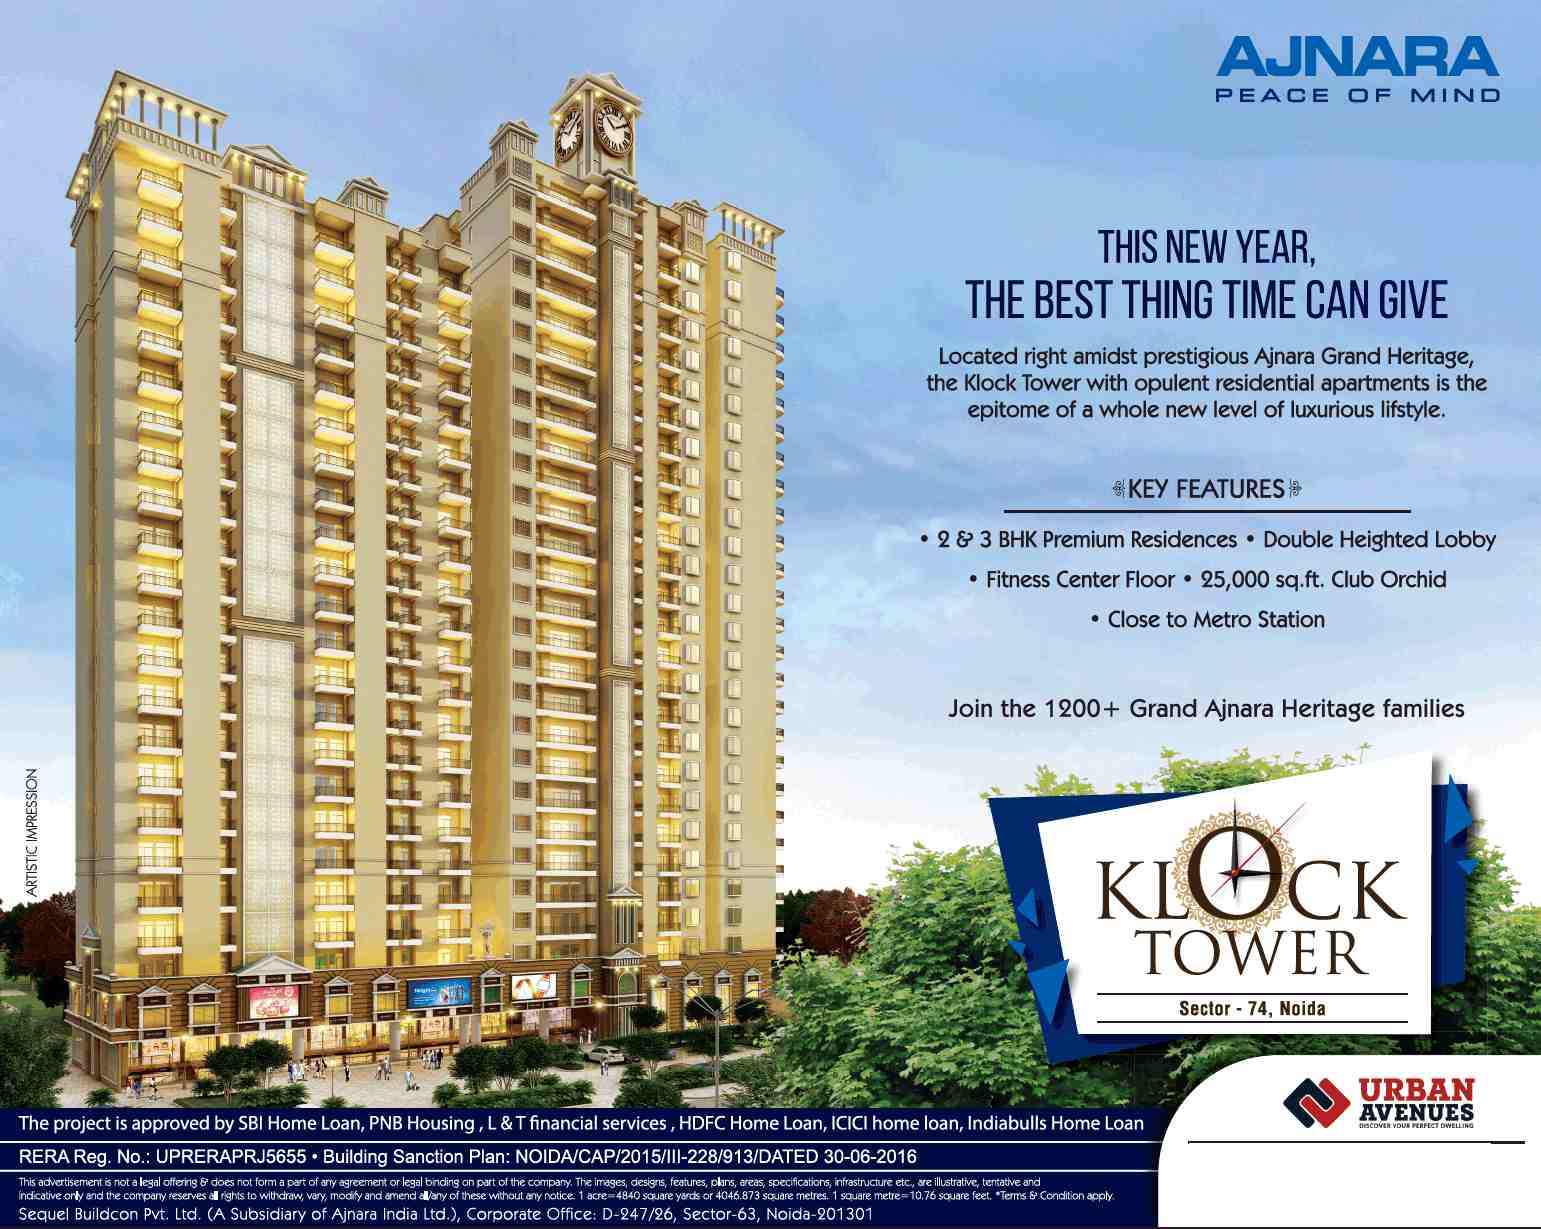 Experience a whole new level of luxurious lifestyle at Ajnara Klock Tower in Noida Update